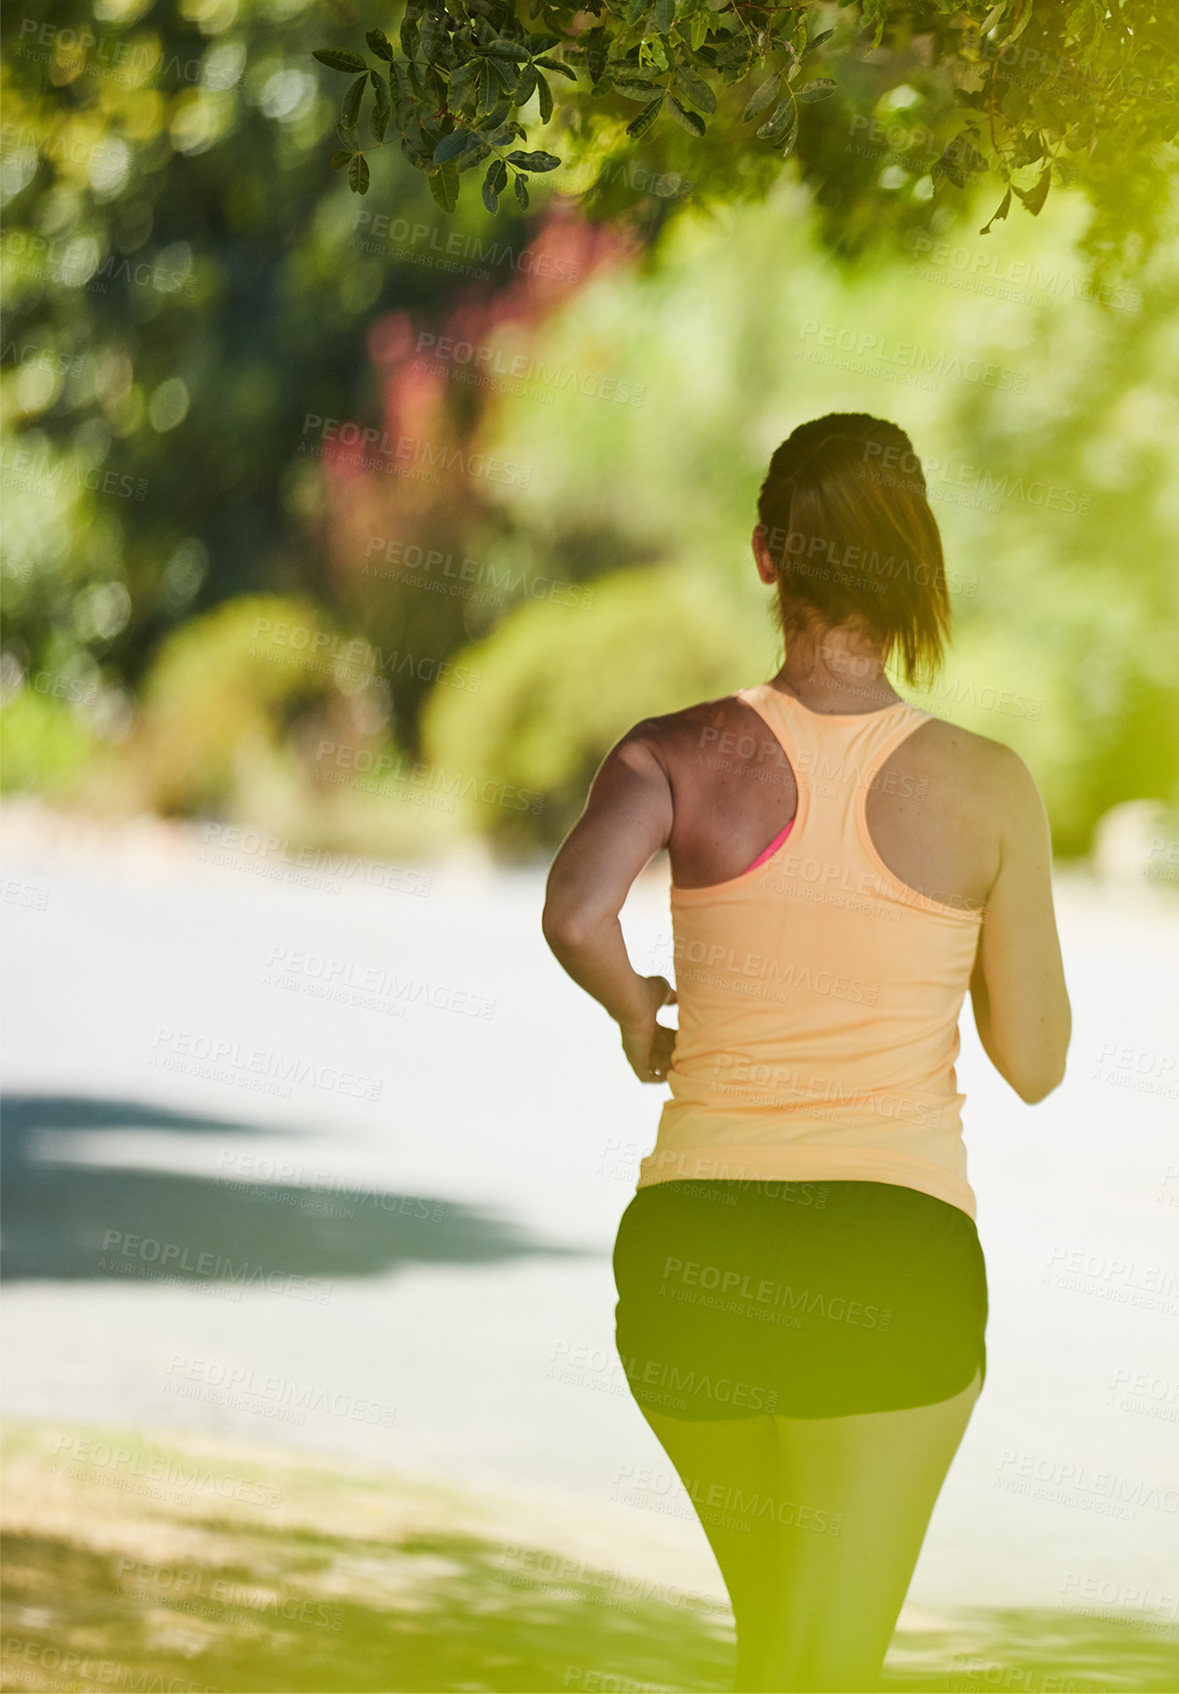 Buy stock photo Rearview shot of an unidentifiable woman jogging in her neighborhood